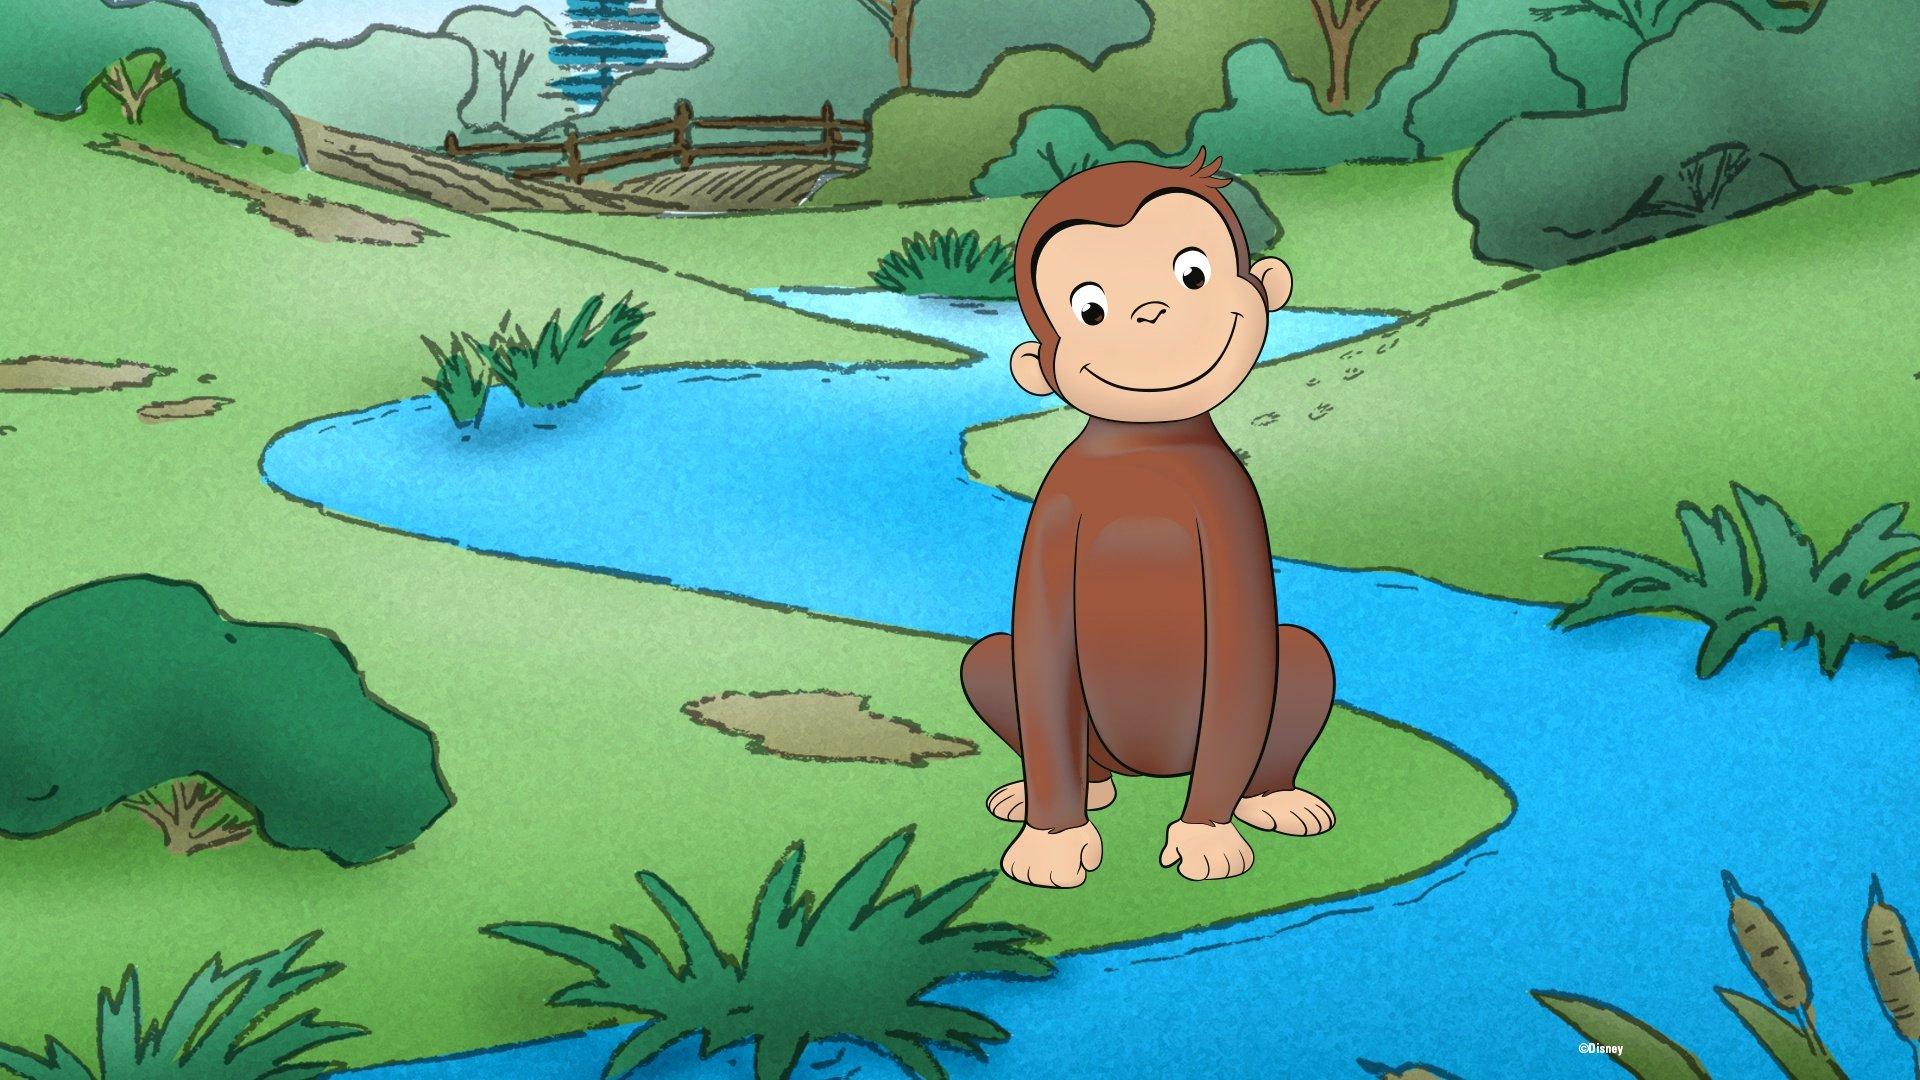 Curioso come George - Stag. 5 Ep. 9